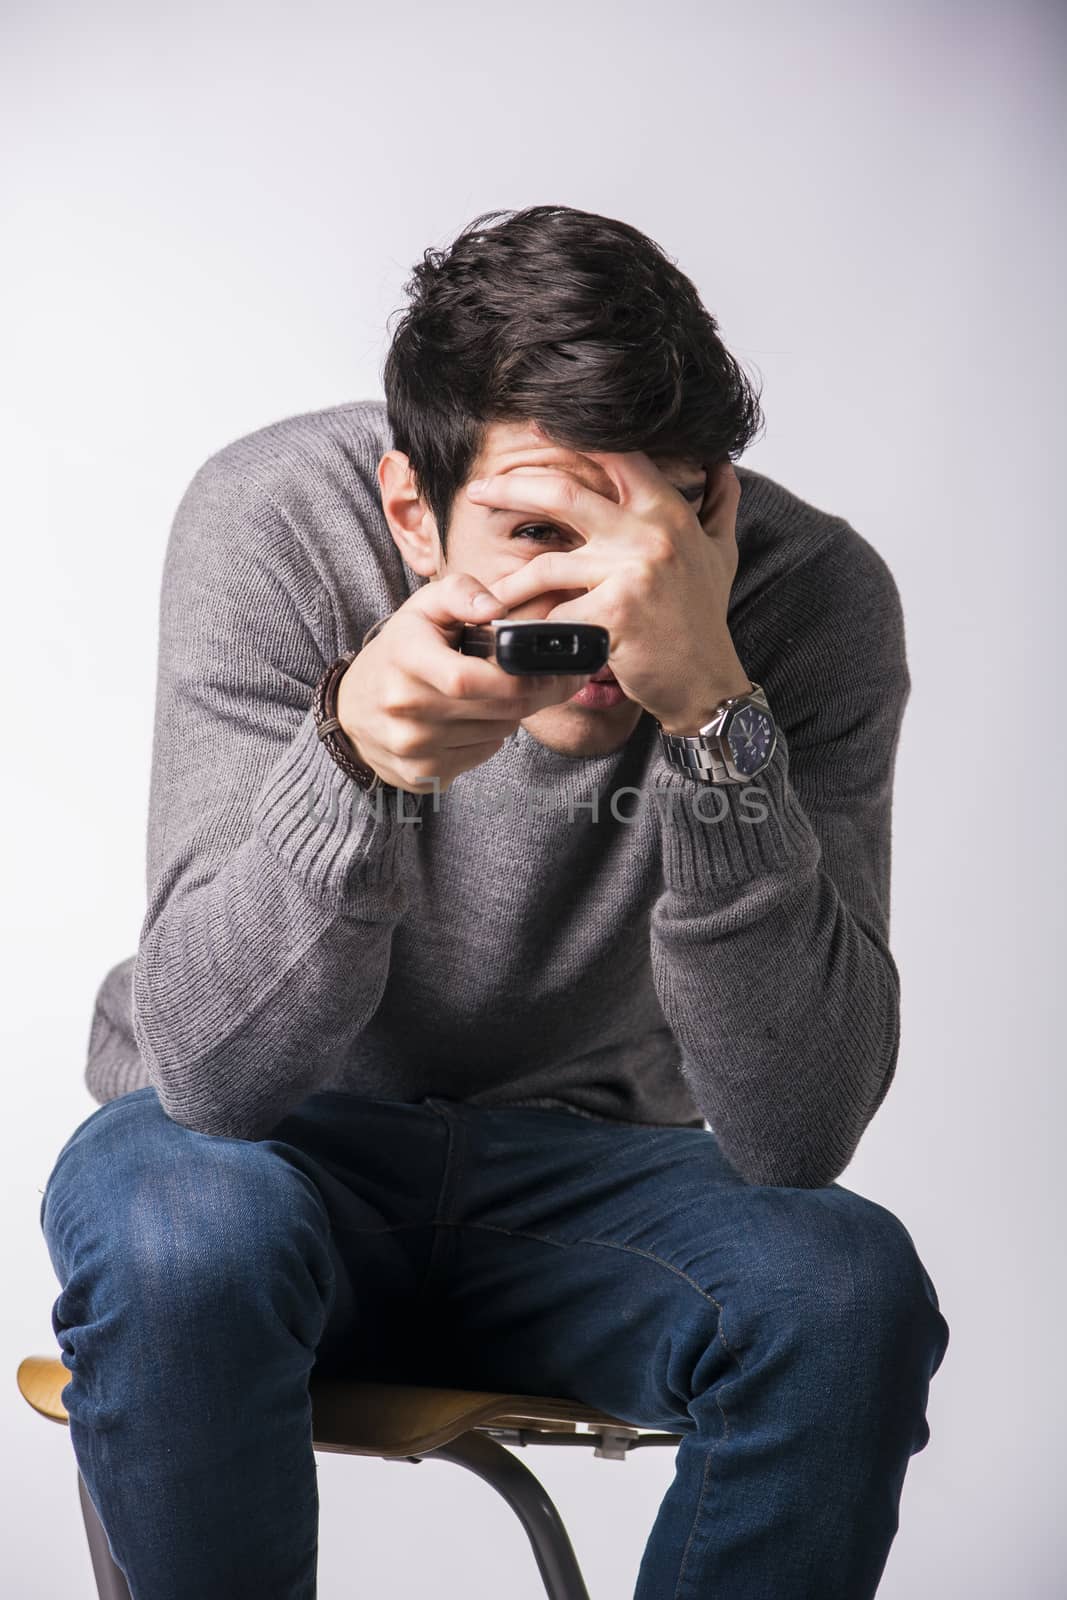 Young man with remote control, covering his eyes scared by artofphoto